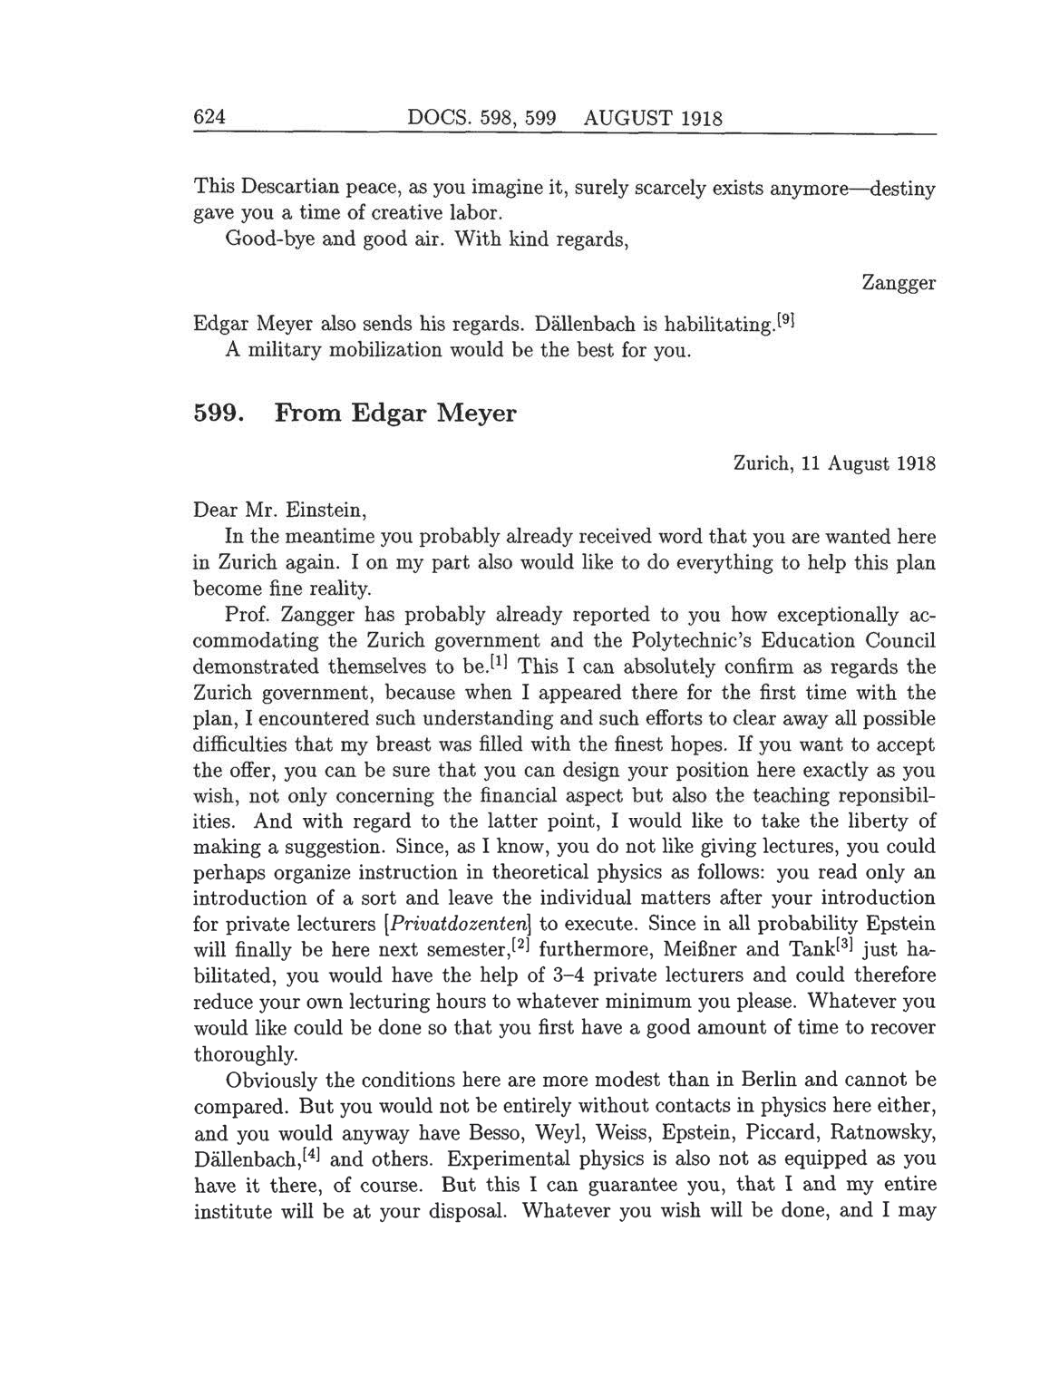 Volume 8: The Berlin Years: Correspondence, 1914-1918 (English translation supplement) page 624